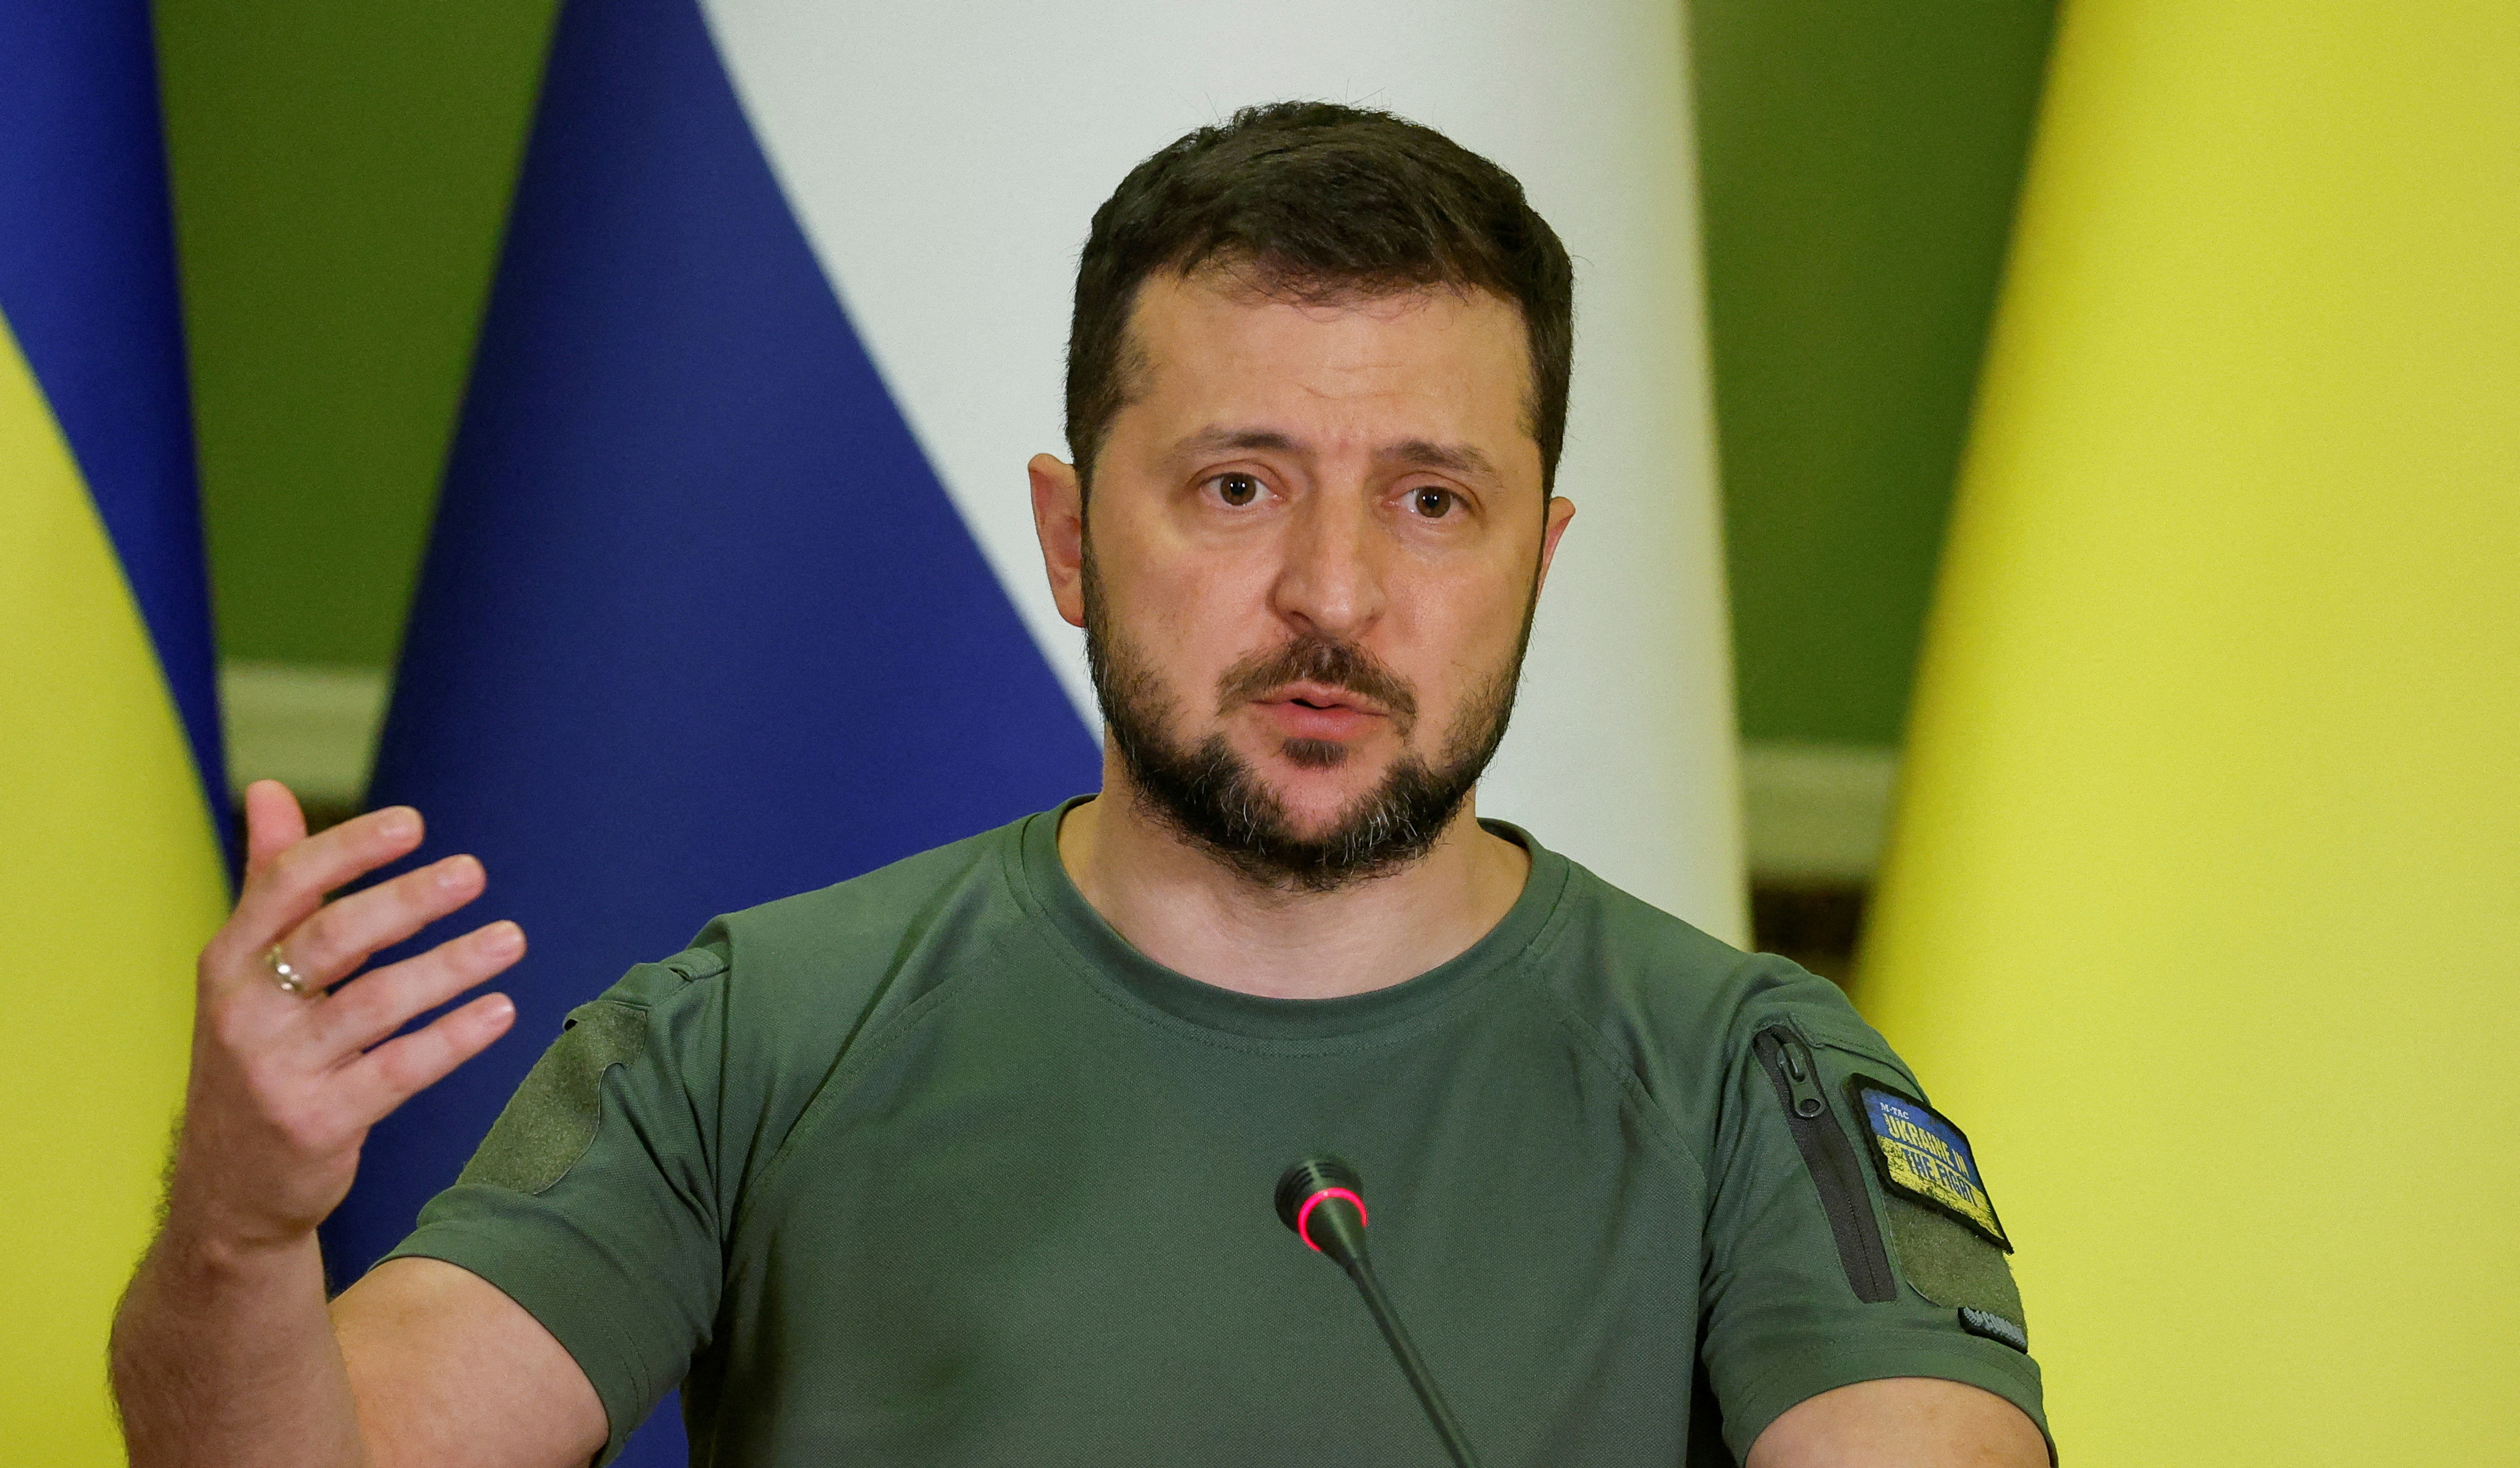 We want to cause maximum damage to end war quickly: Zelensky